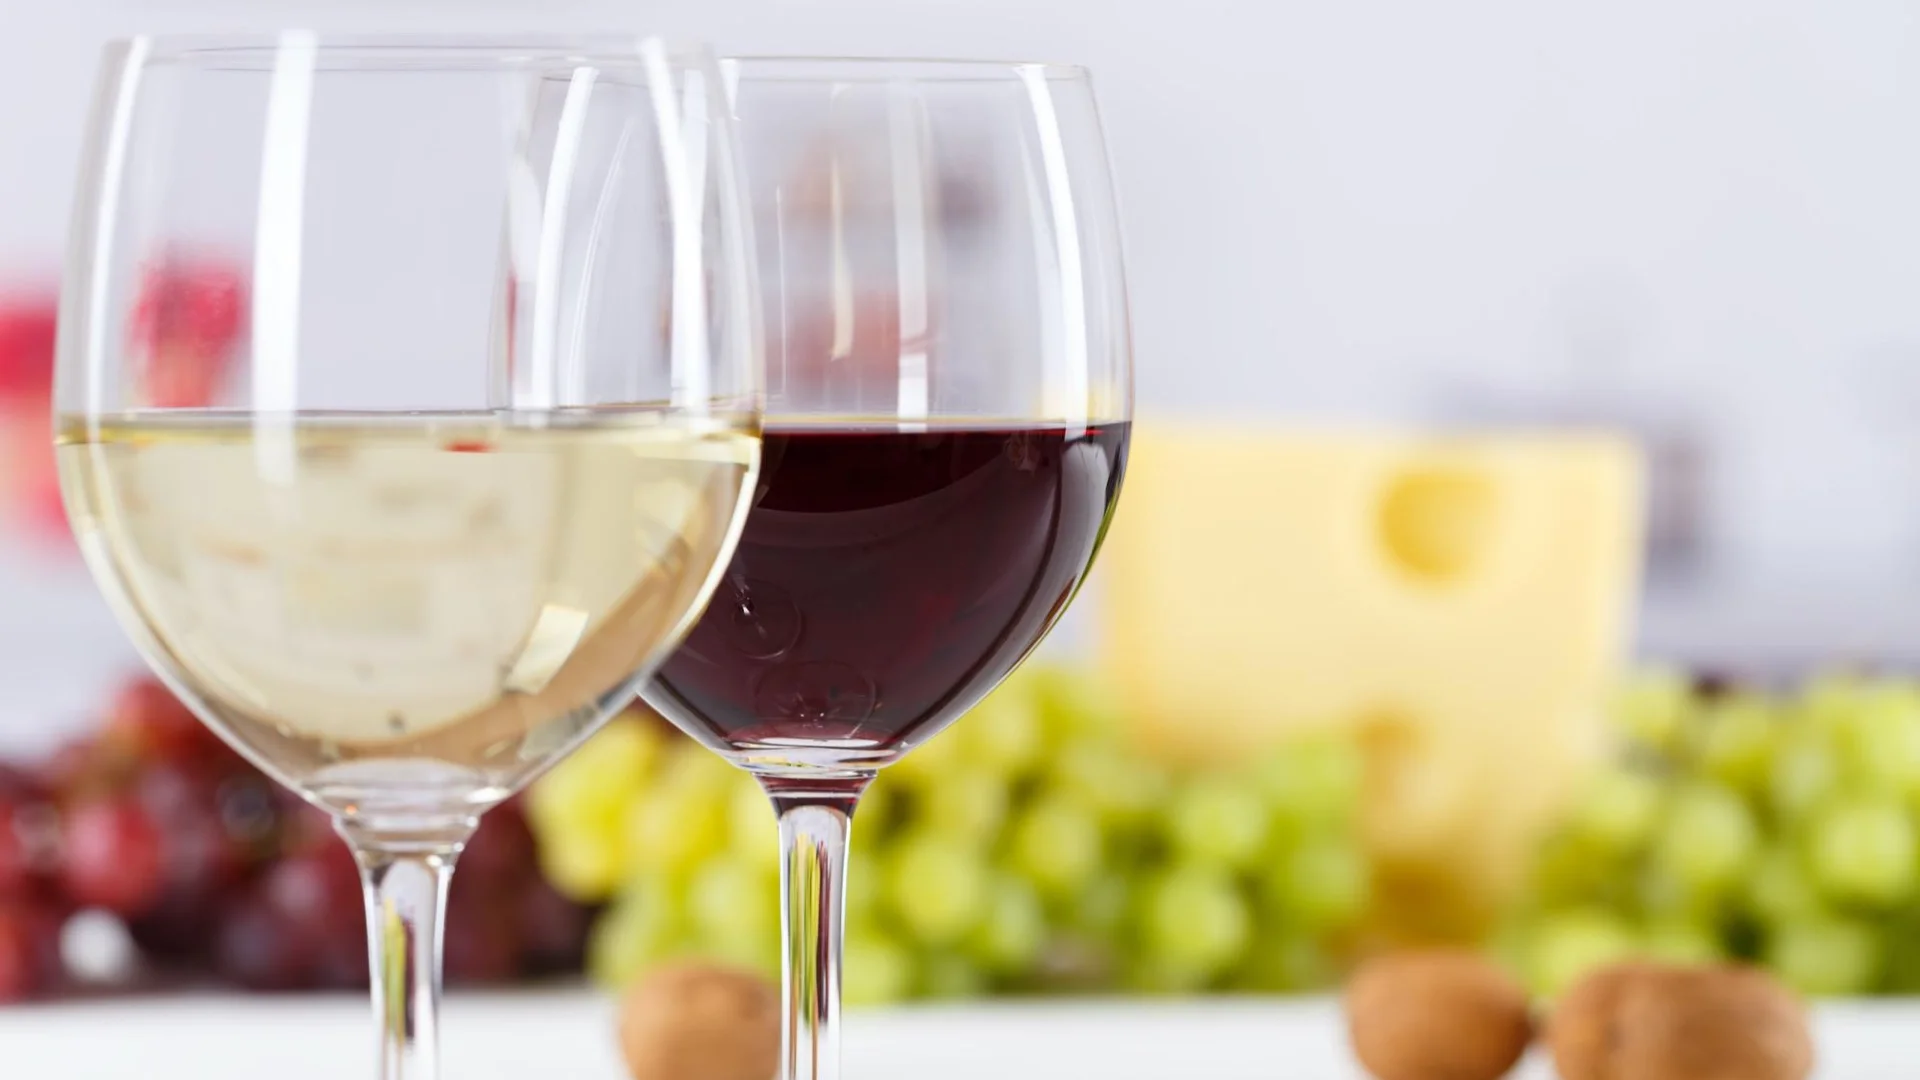 Conversion in Different Contexts: Water vs. Wine